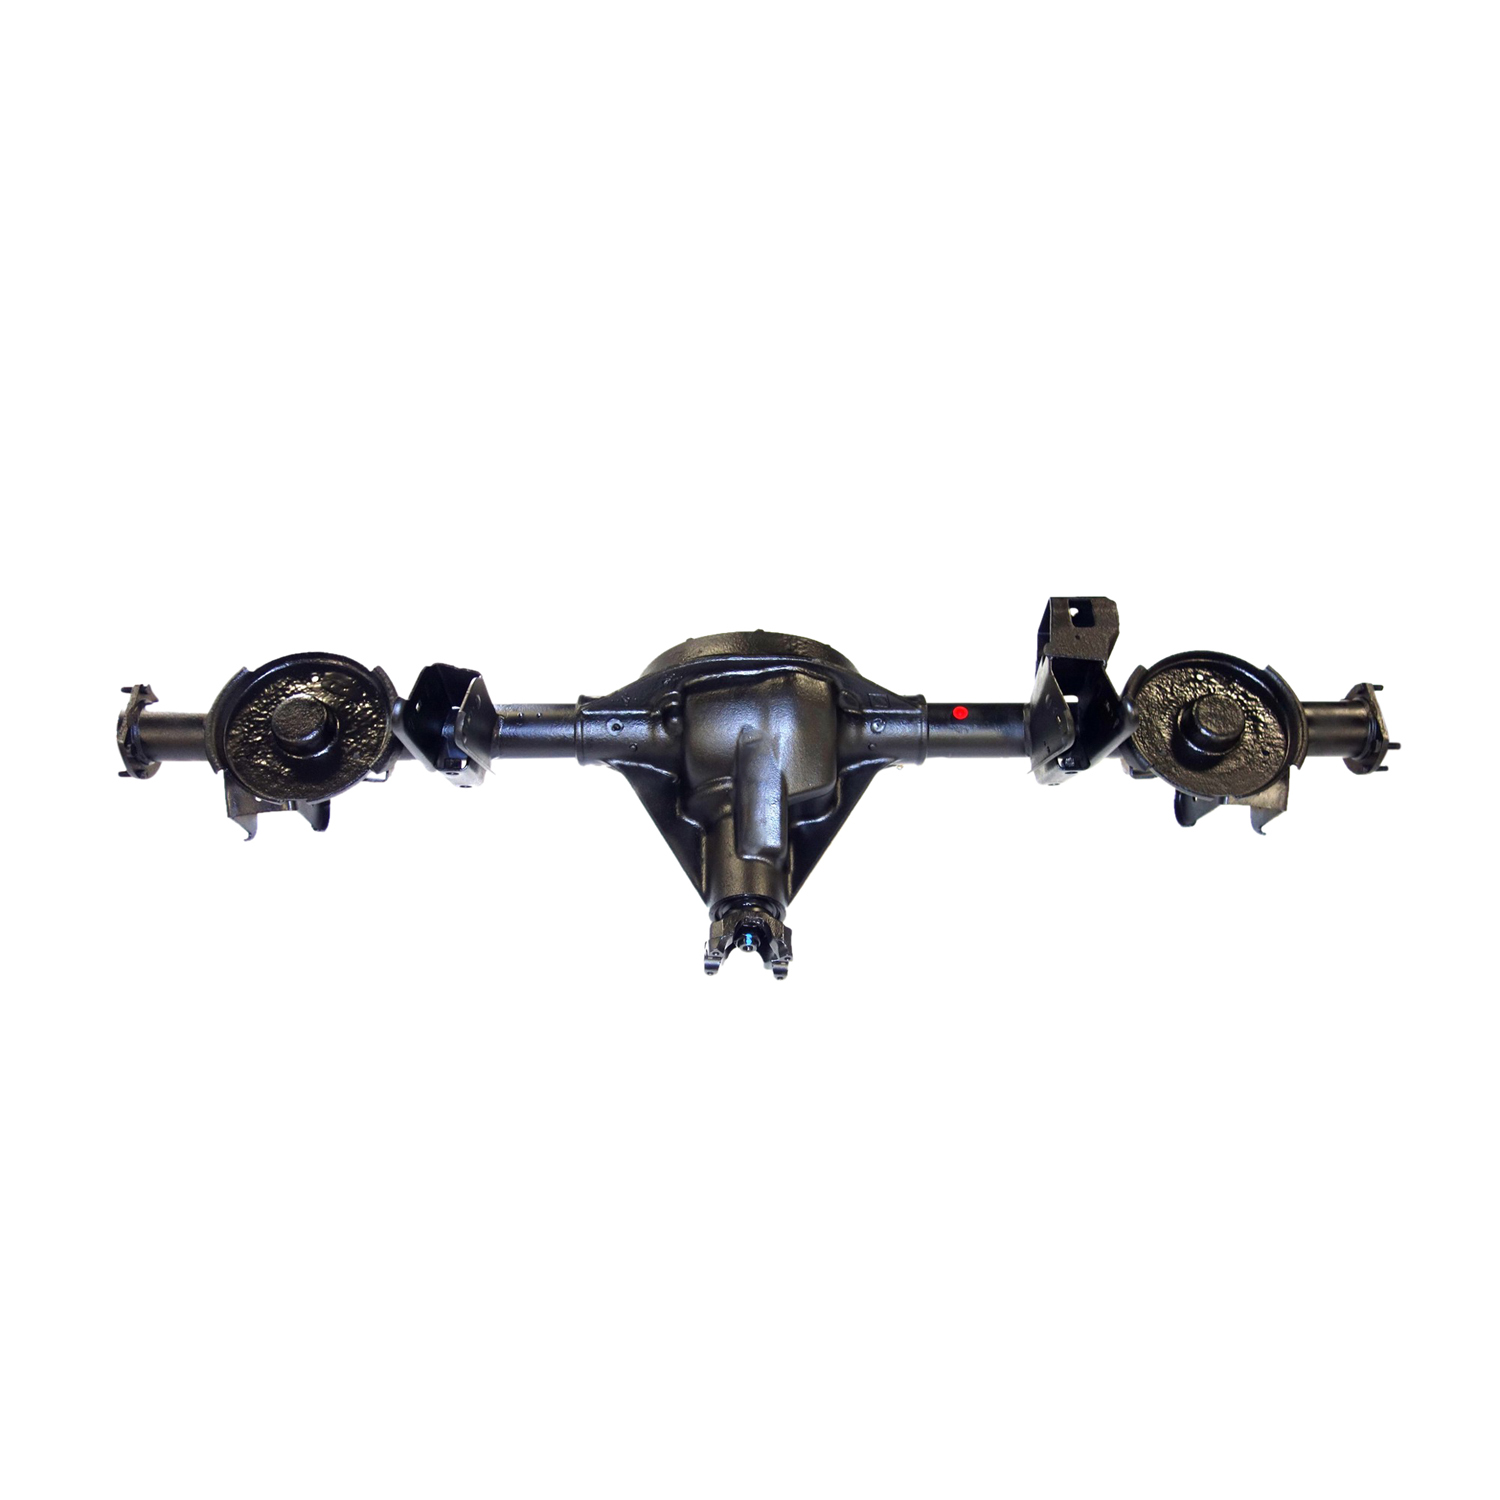 Remanufactured Complete Axle Assembly for Dana 35 97-02 Wrangler 3.54 with ABS, Posi LSD